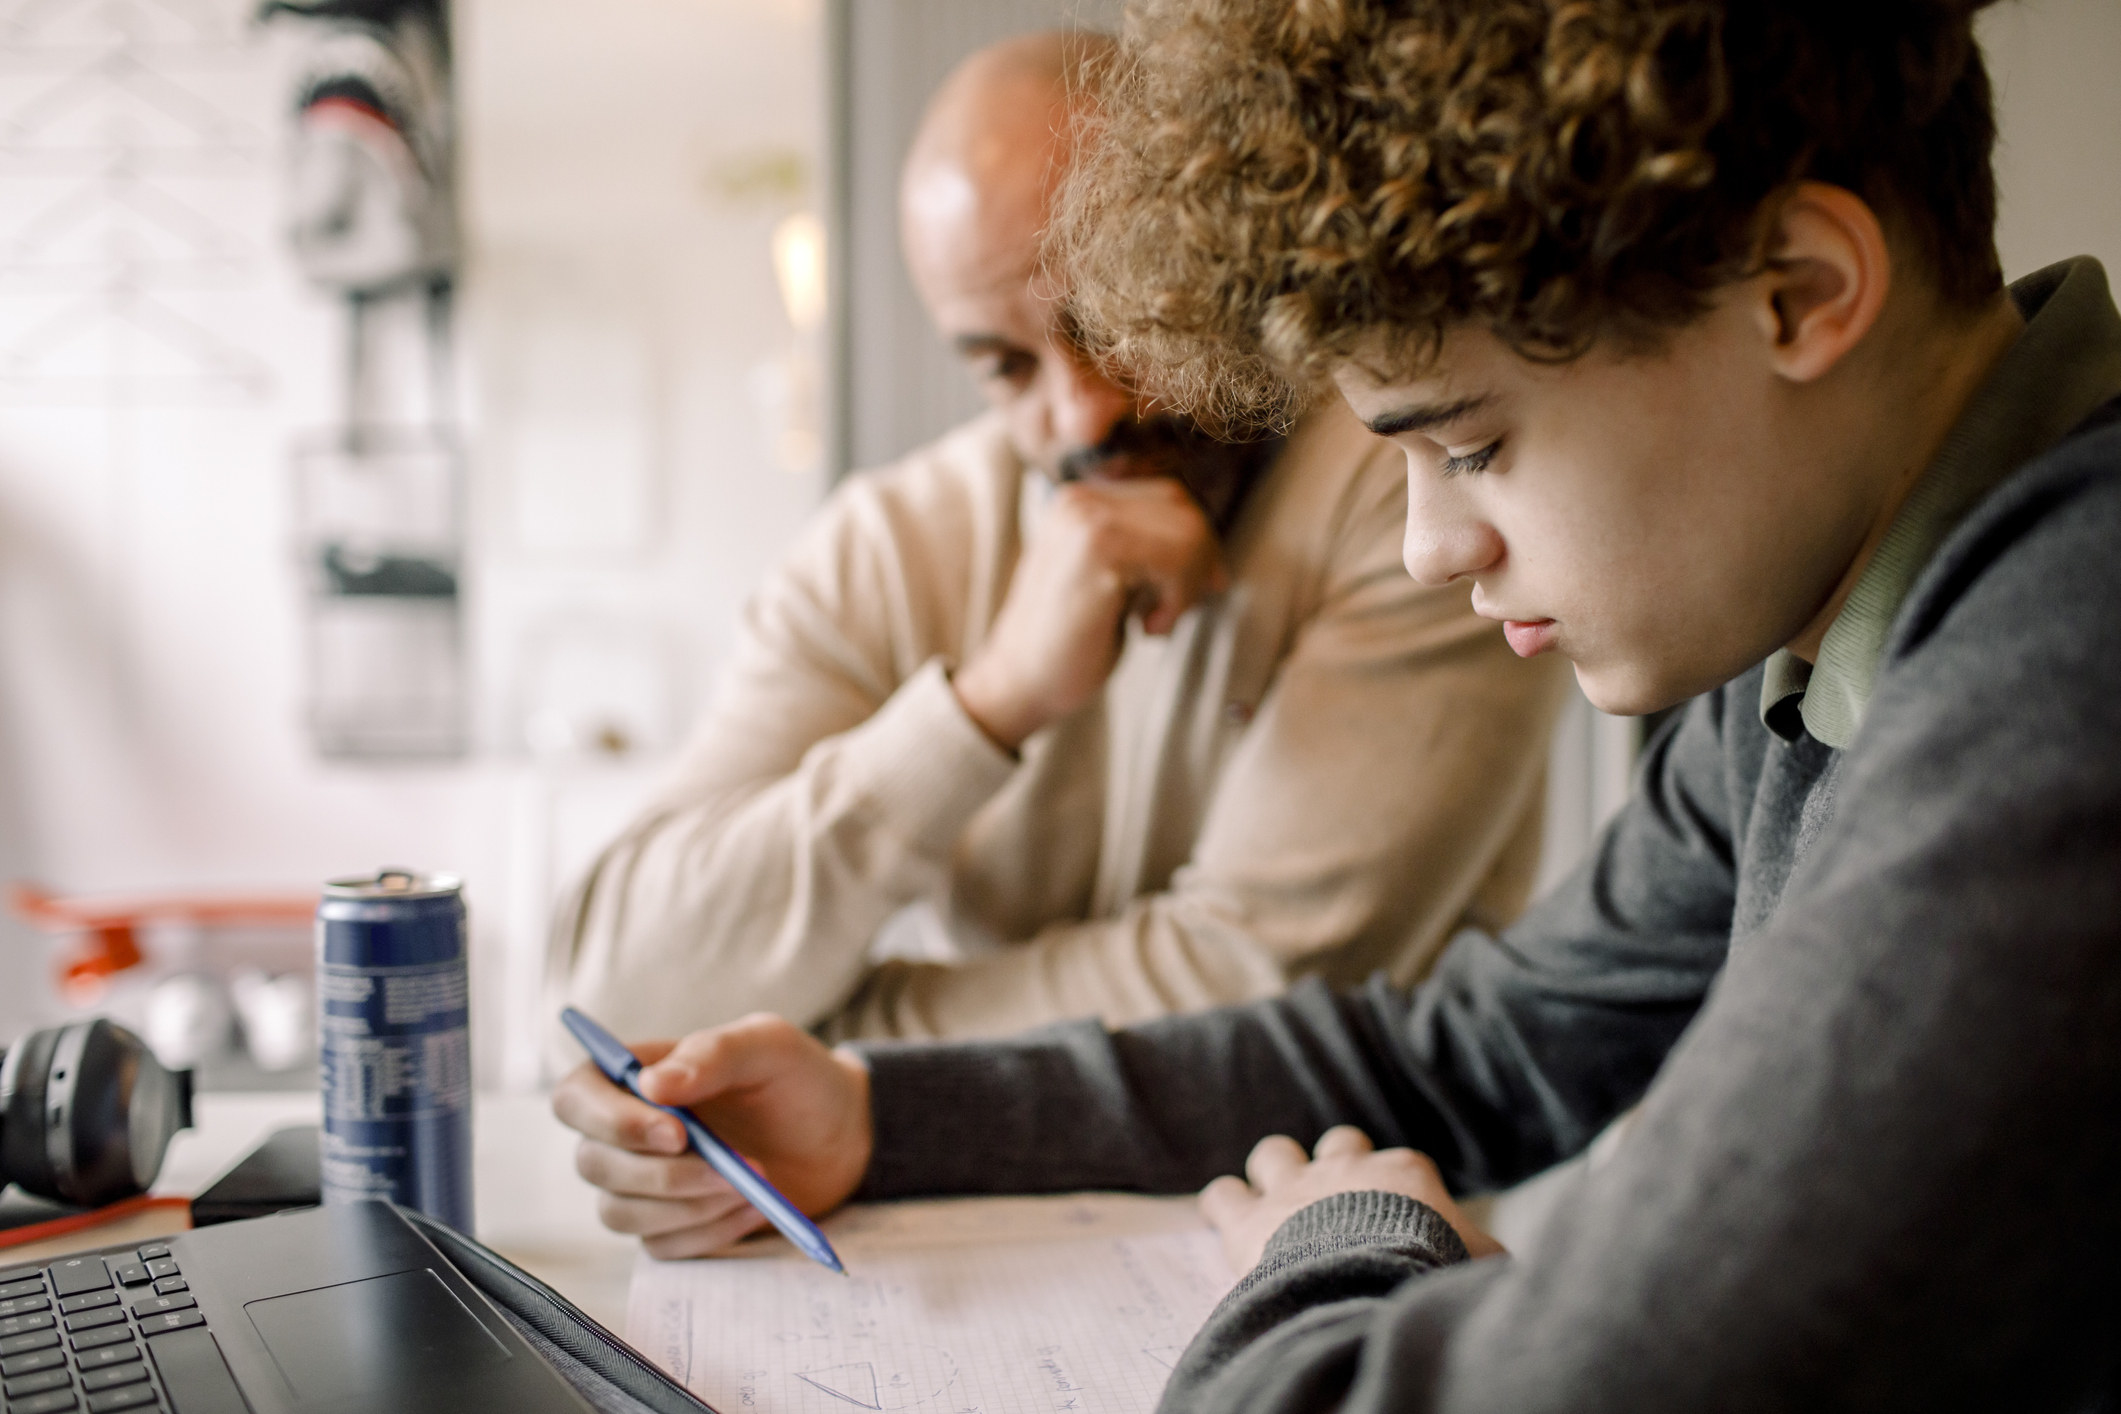 A dad helps his teen son with homework